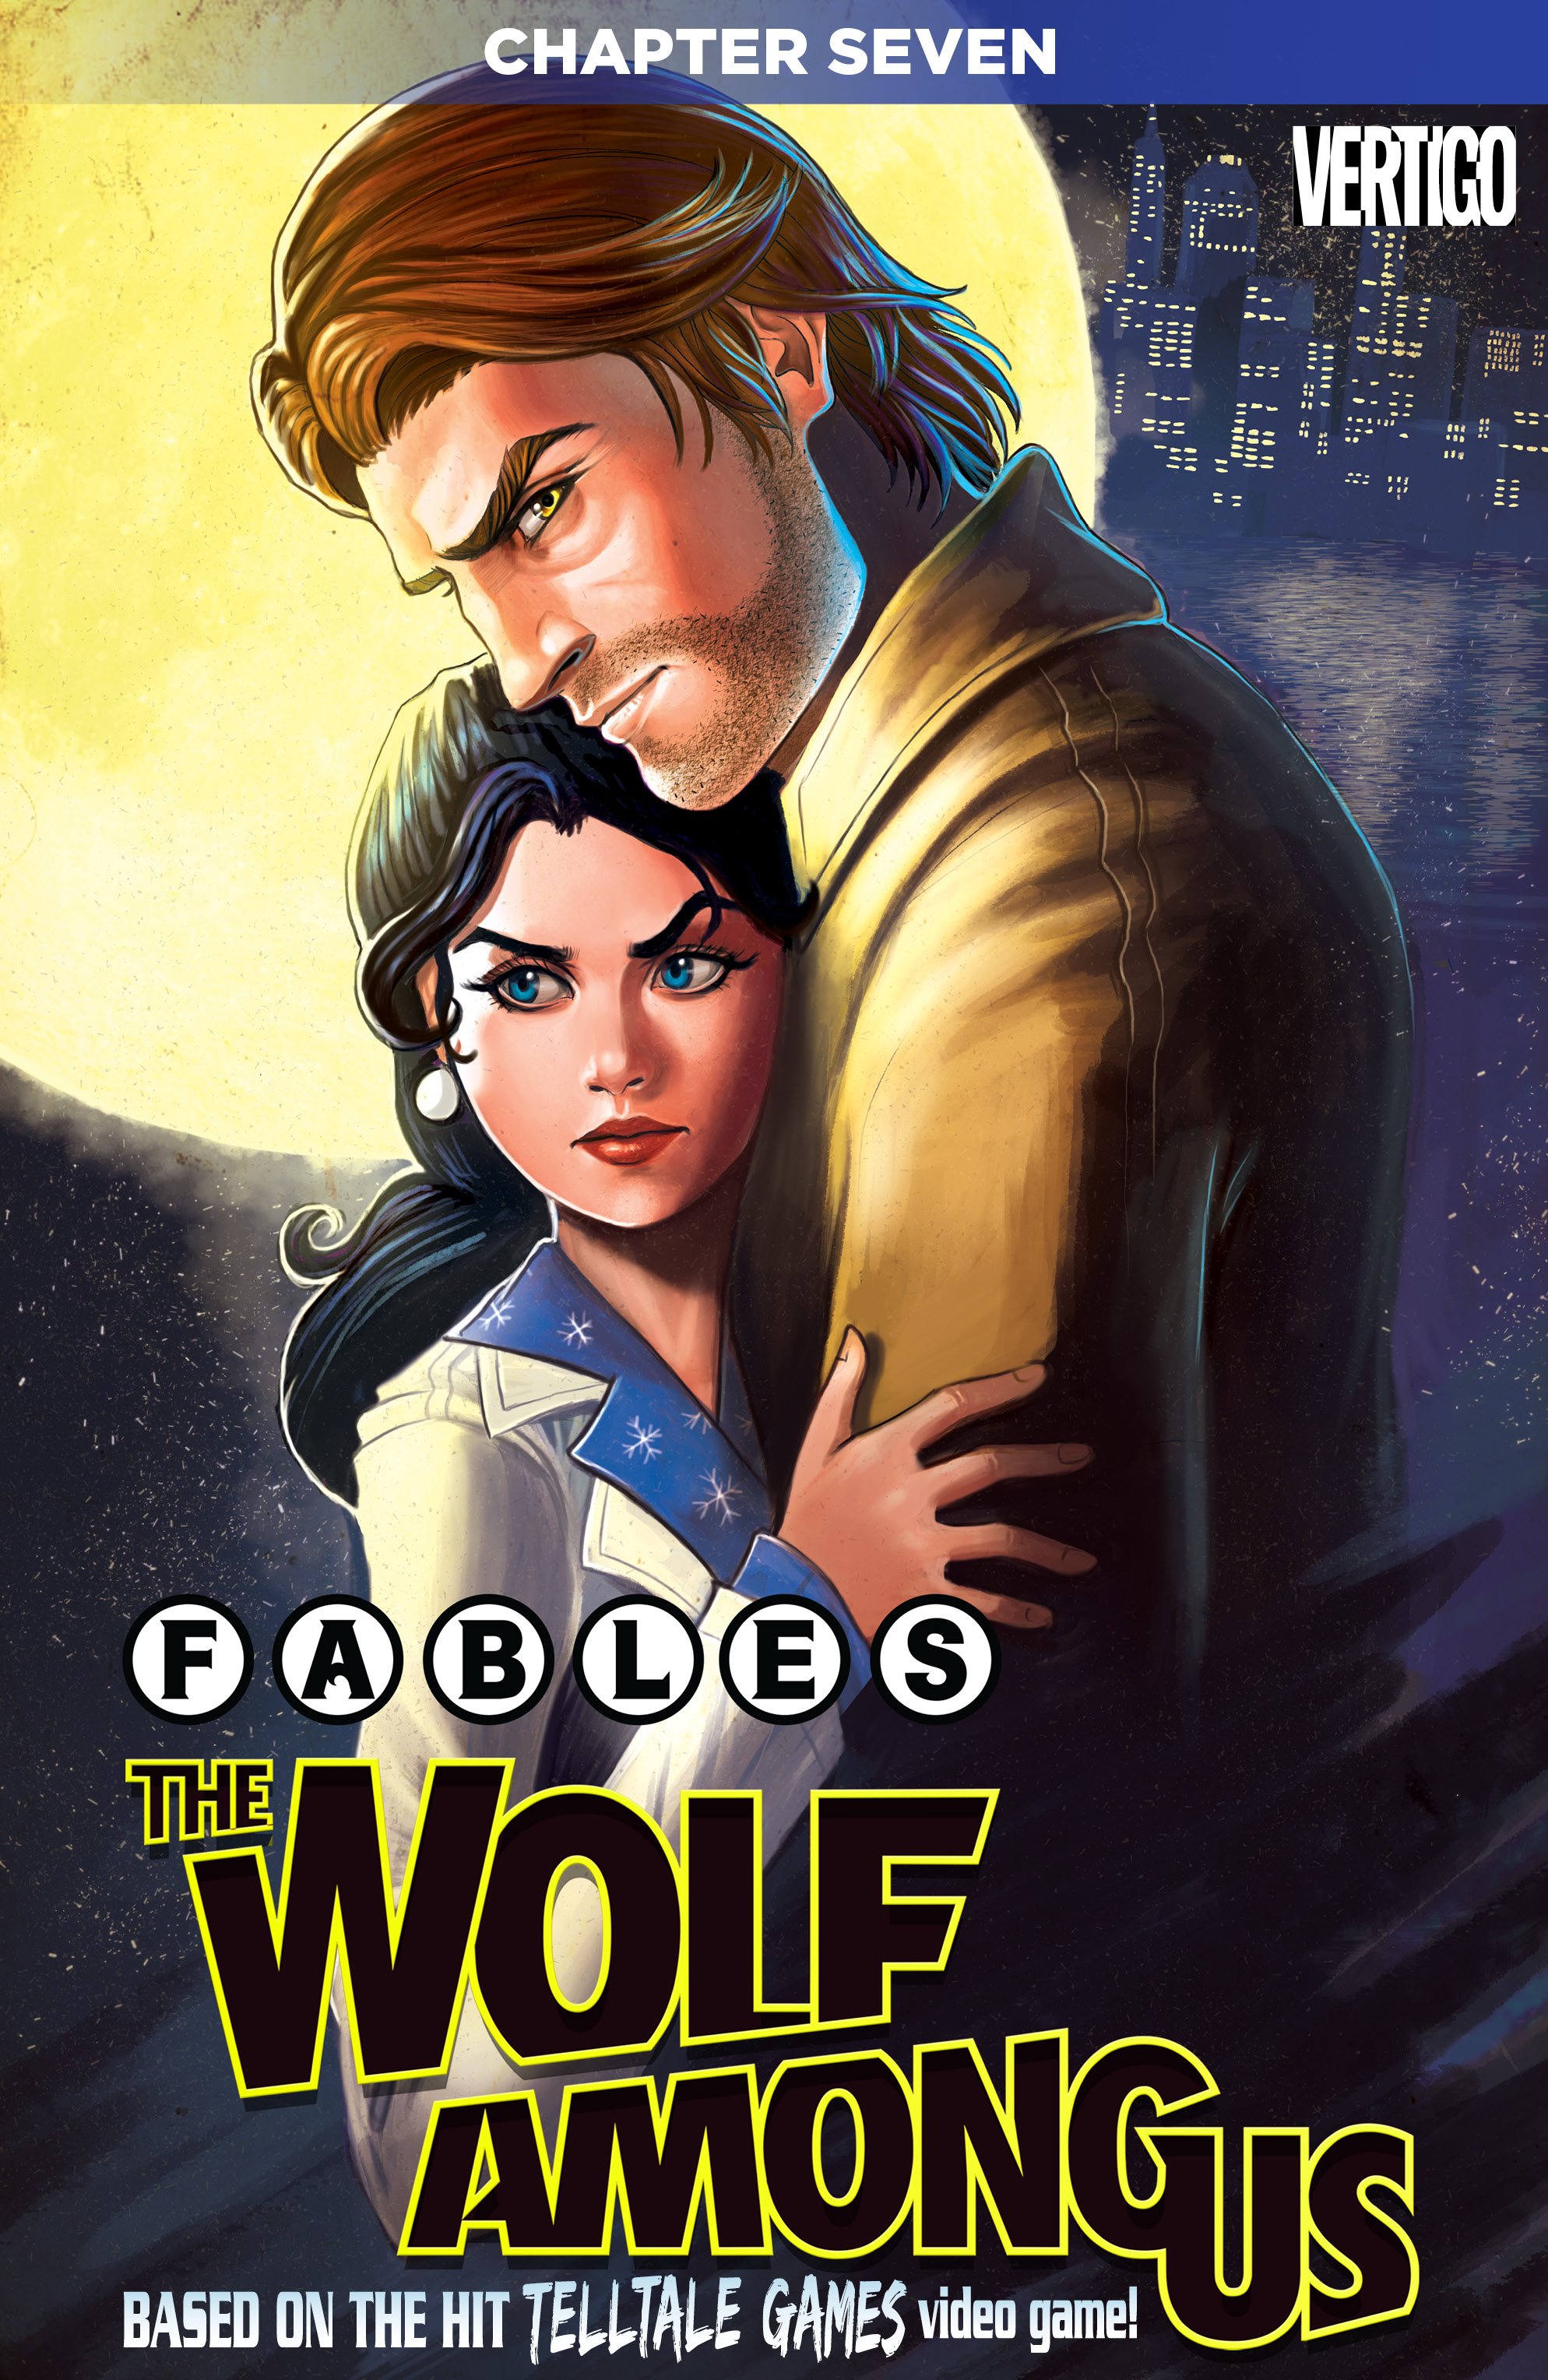 Fables: The Wolf Among Us #7 preview images